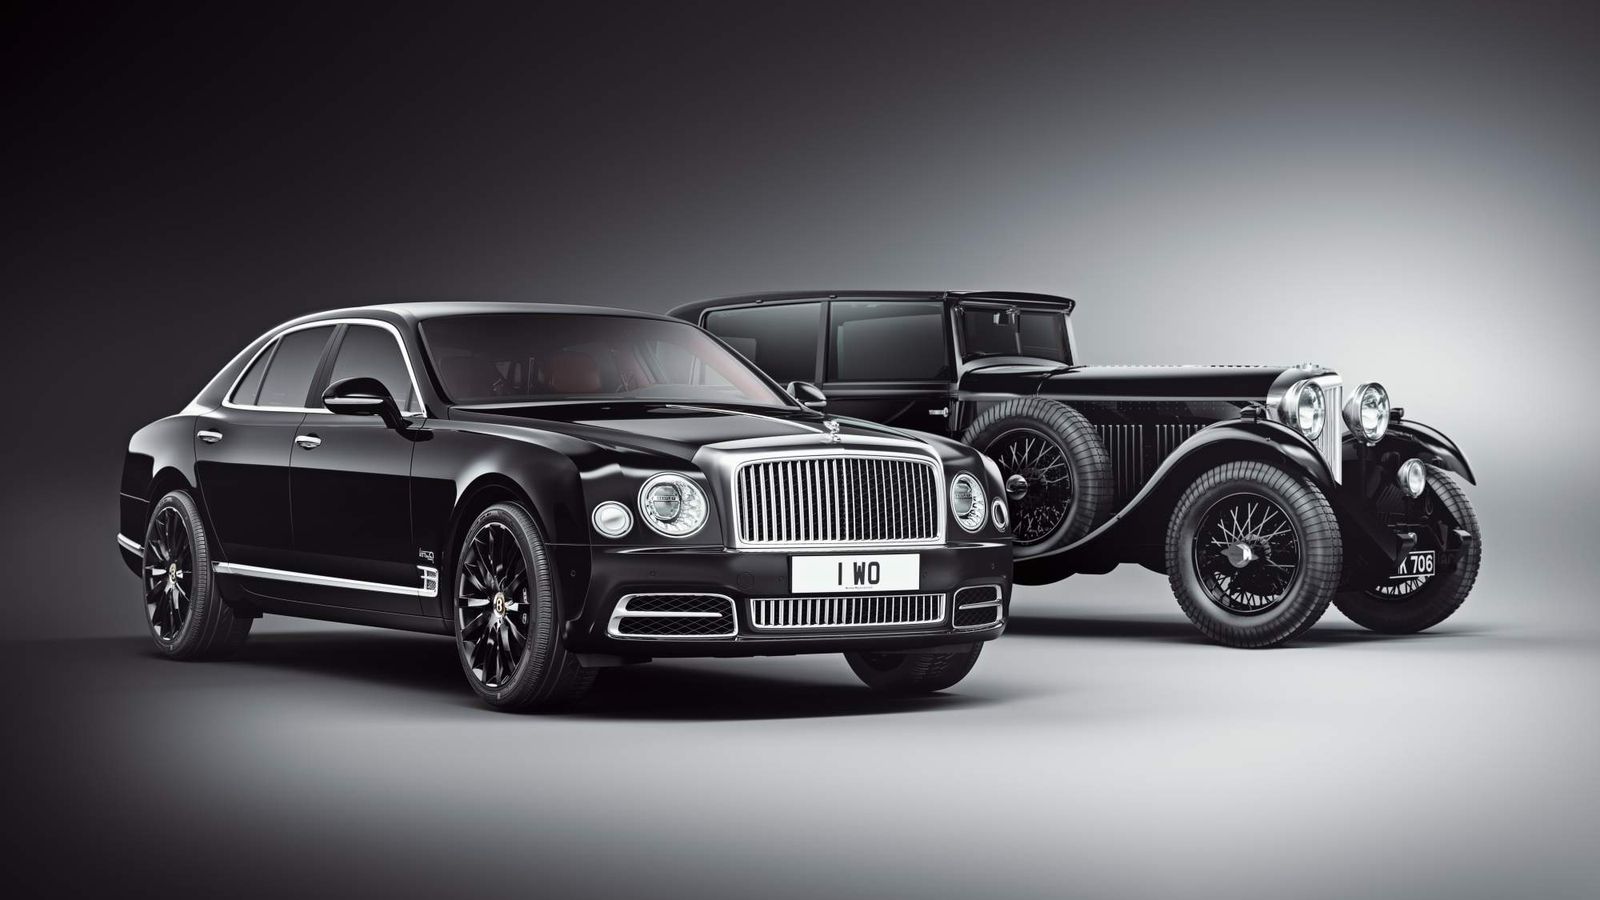 Bentley-Mulsanne-WO-Edition-by-Mulliner-and-Bentley-8-Litre